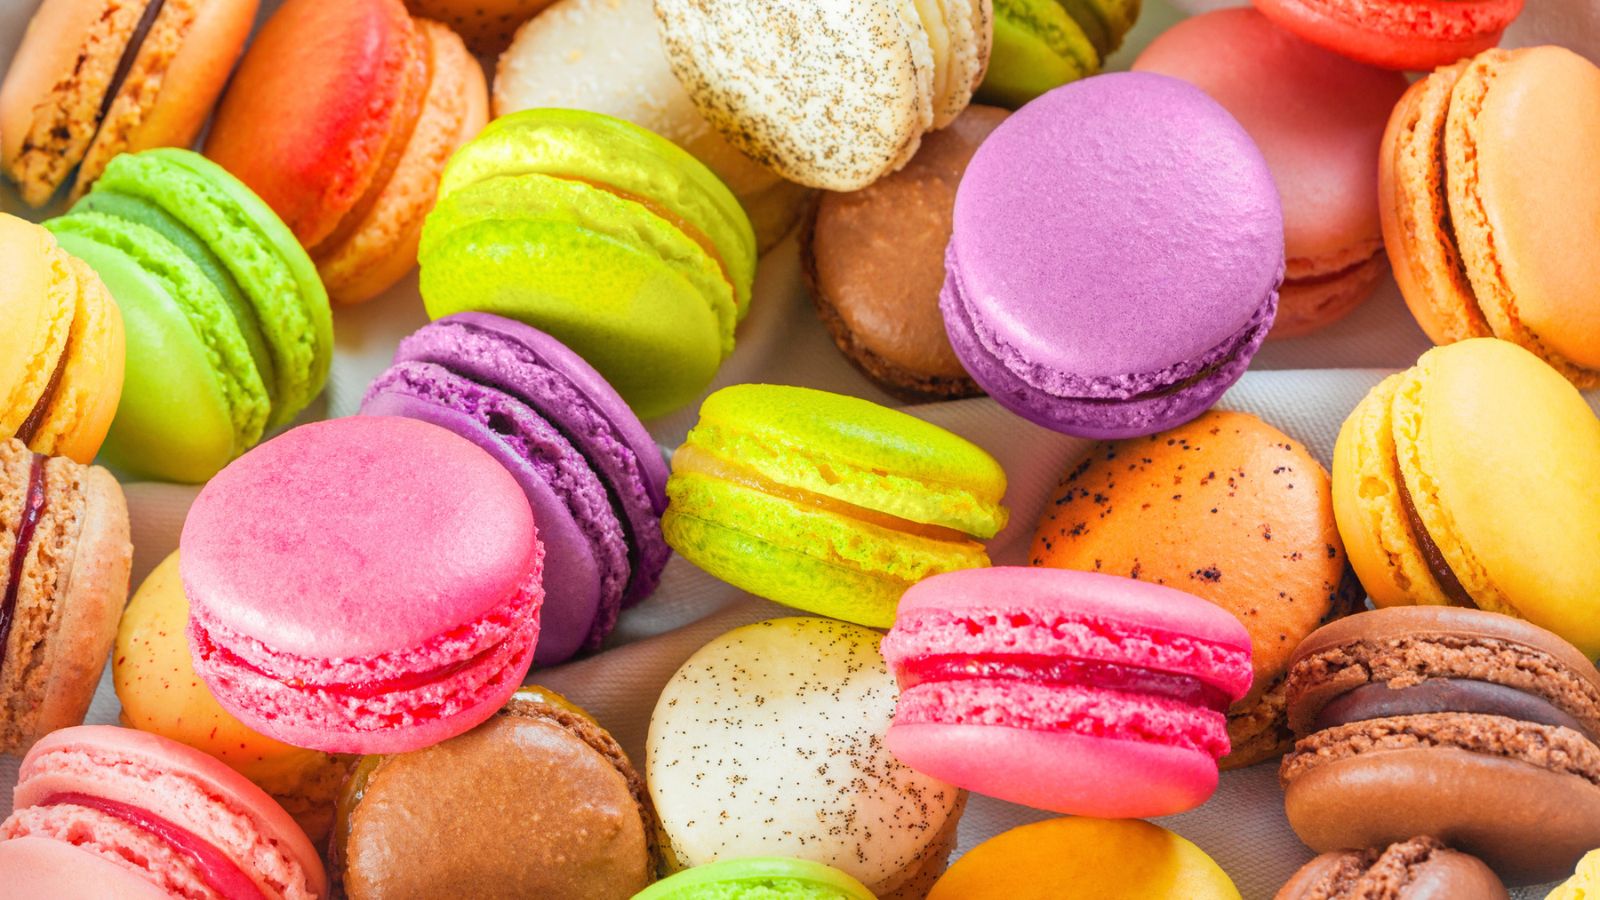 14 Foods You Think Are Originated From France But They Are Not